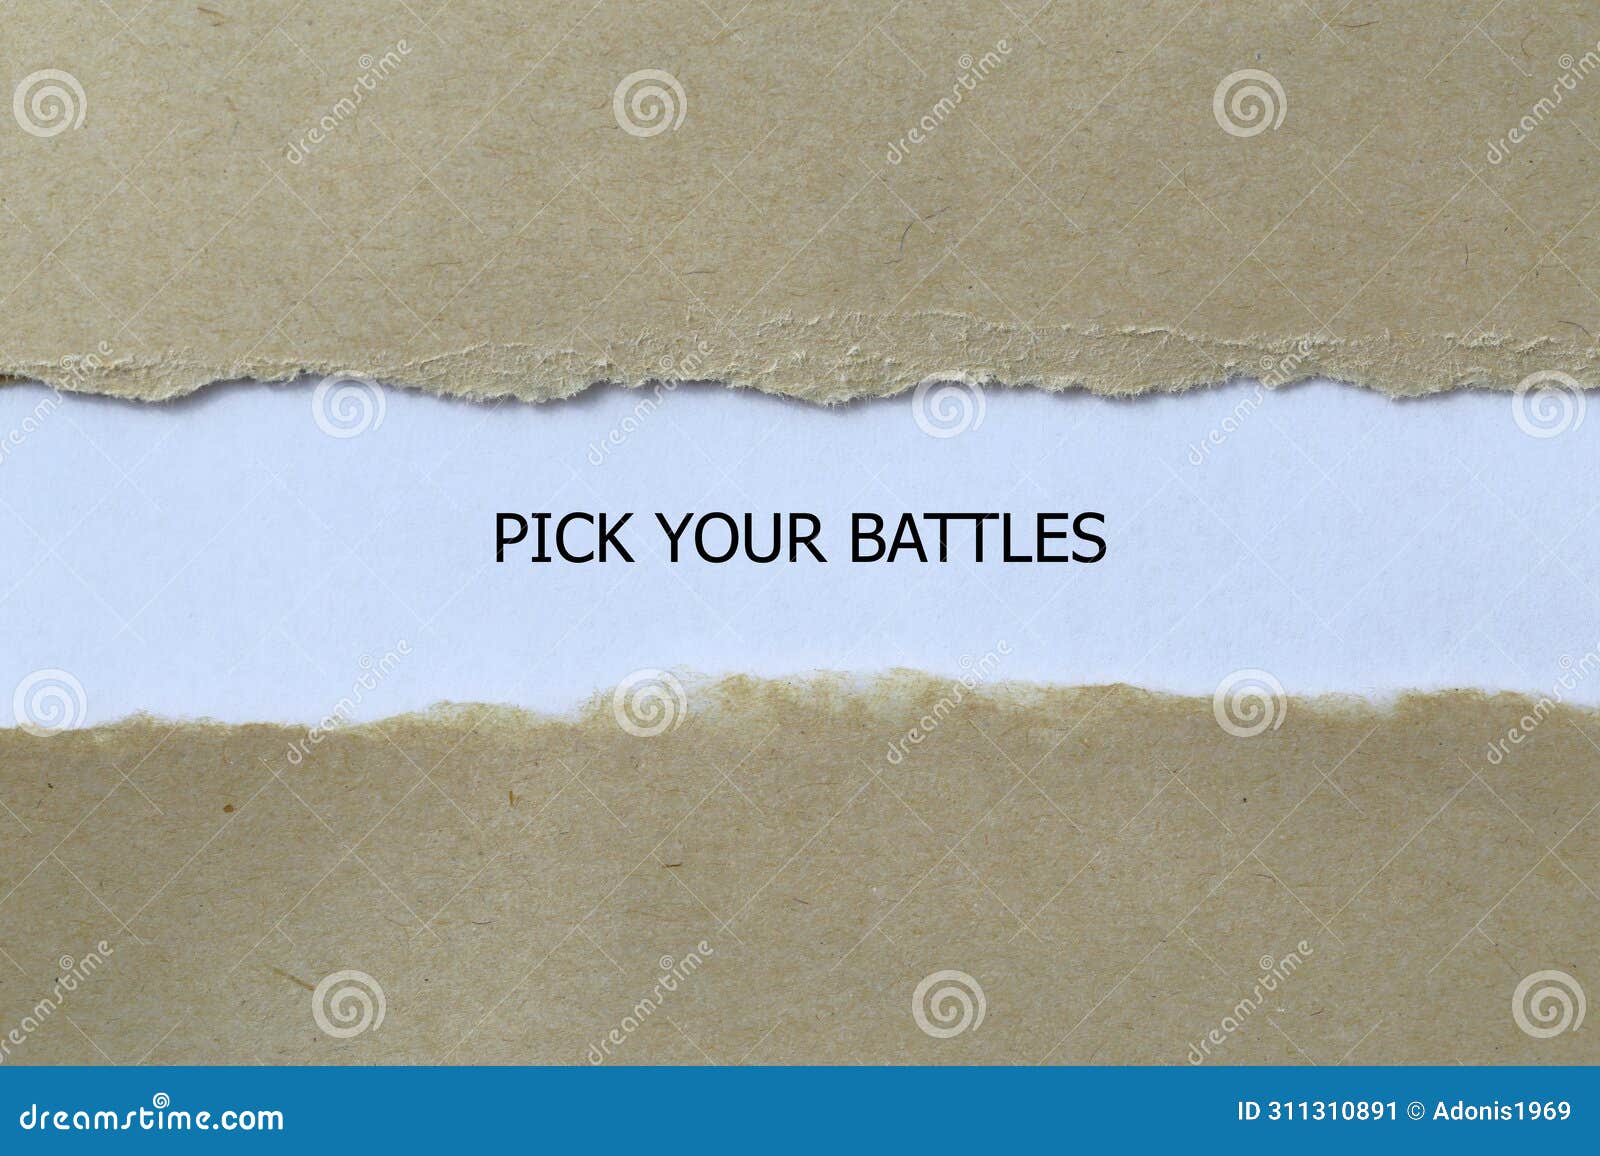 pick your battles on white paper